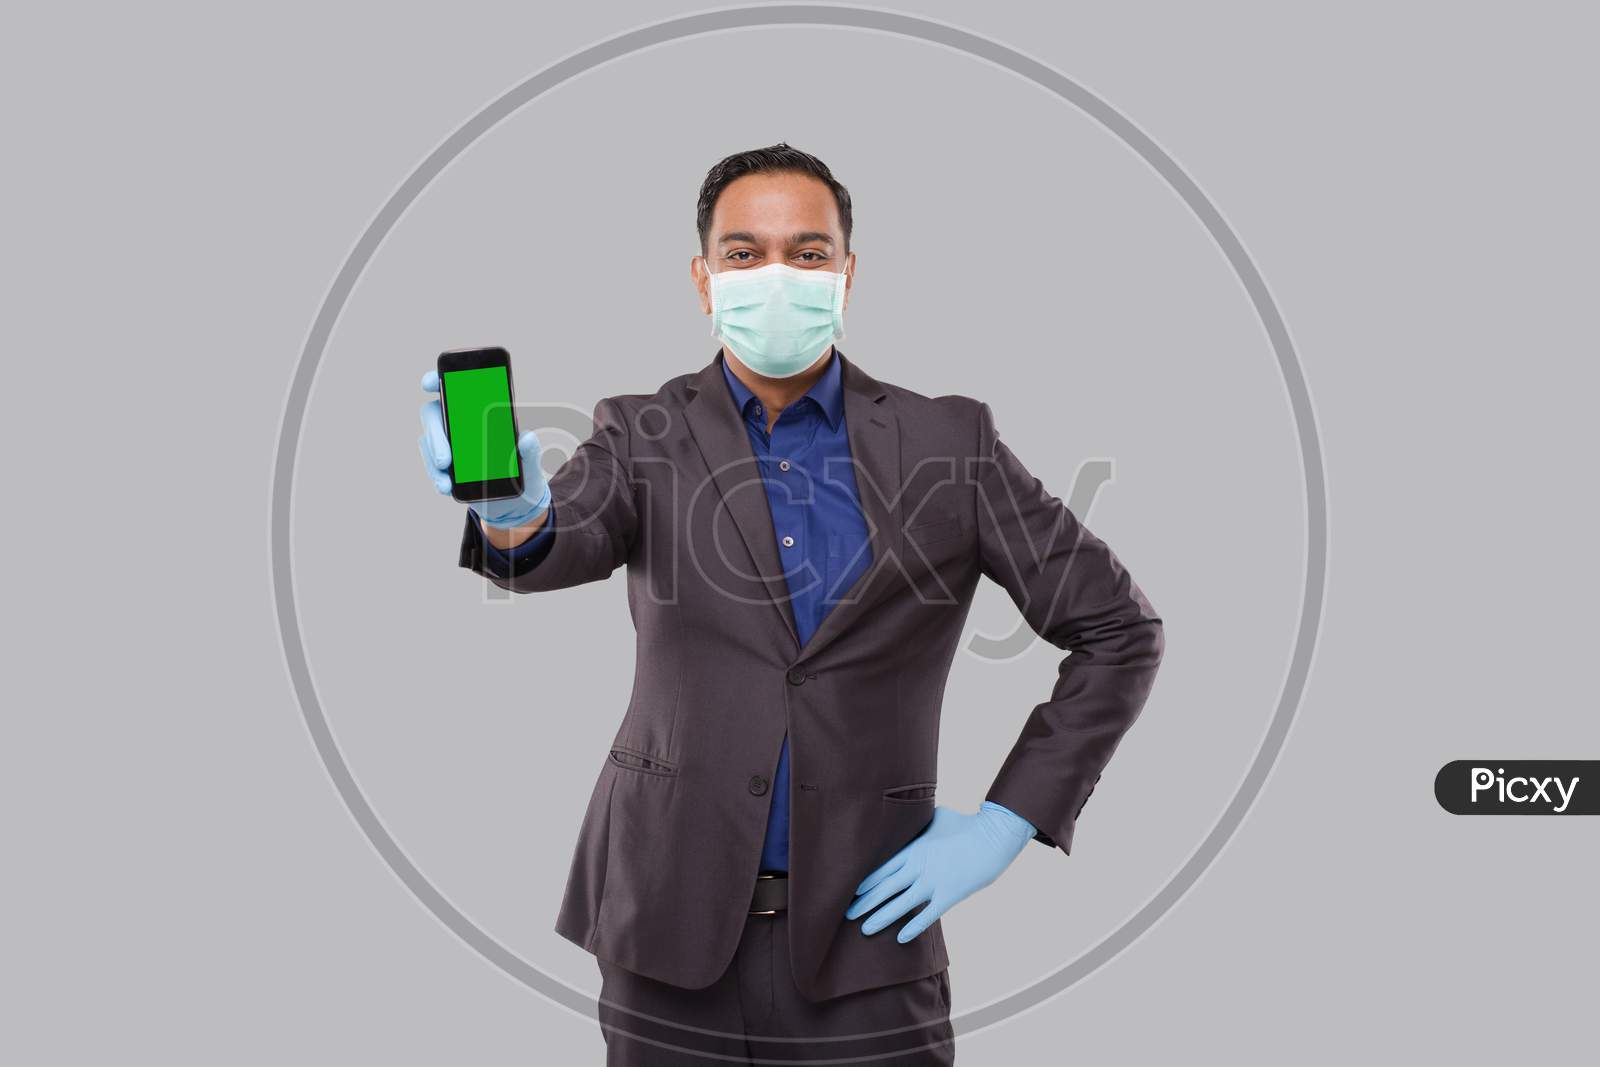 Businessman Showing Phone Wearing Medical Mask And Gloves. Indian Business Man Technology Business At Home. Phone Green Screen Isolated